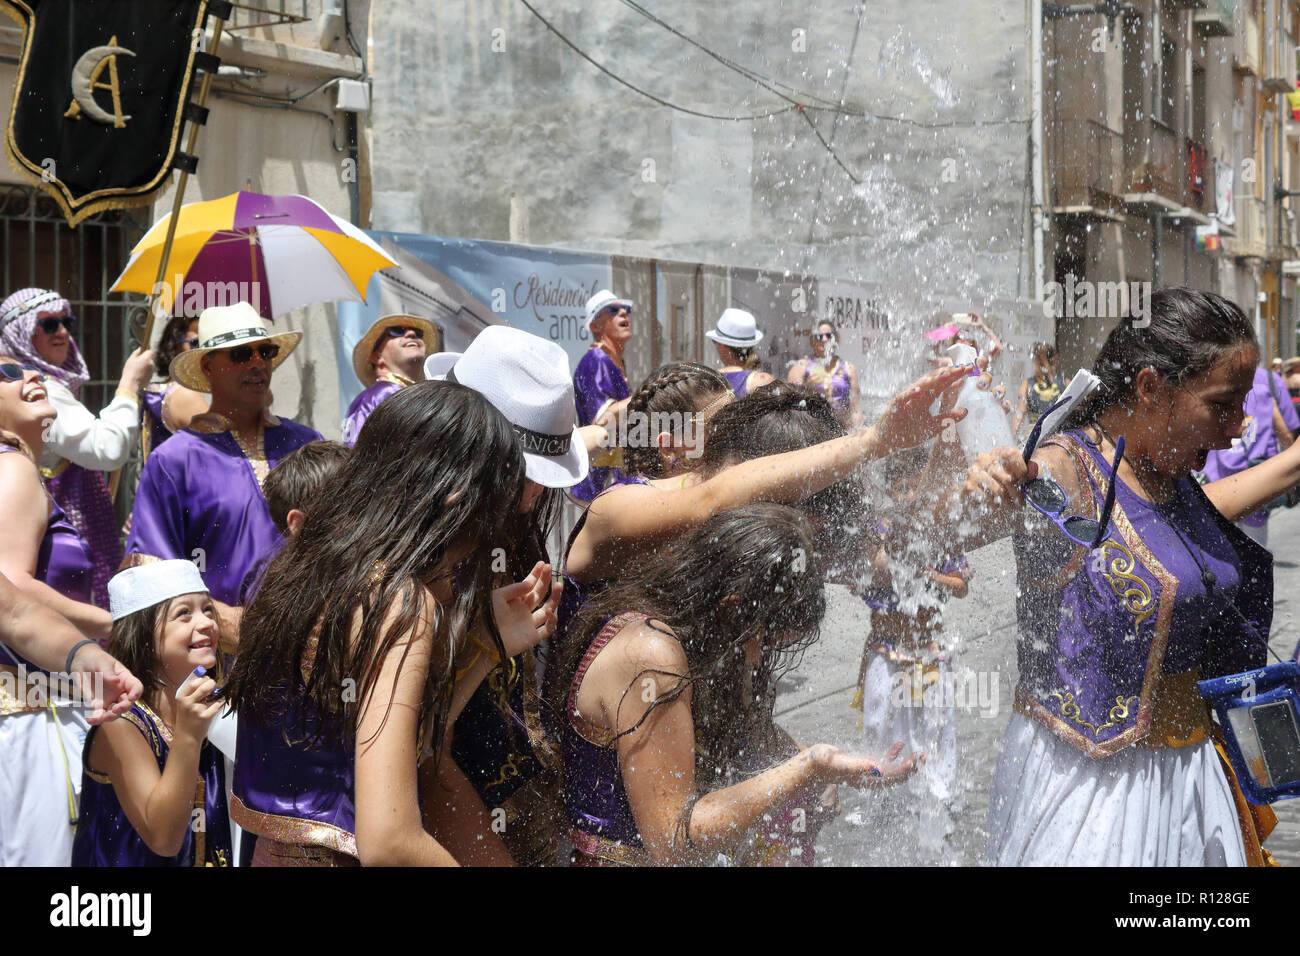 People under a water jet from Moros Almohabenos company on a street parade during the Moors and Christians historical reenactment in Orihuela, Spain Stock Photo